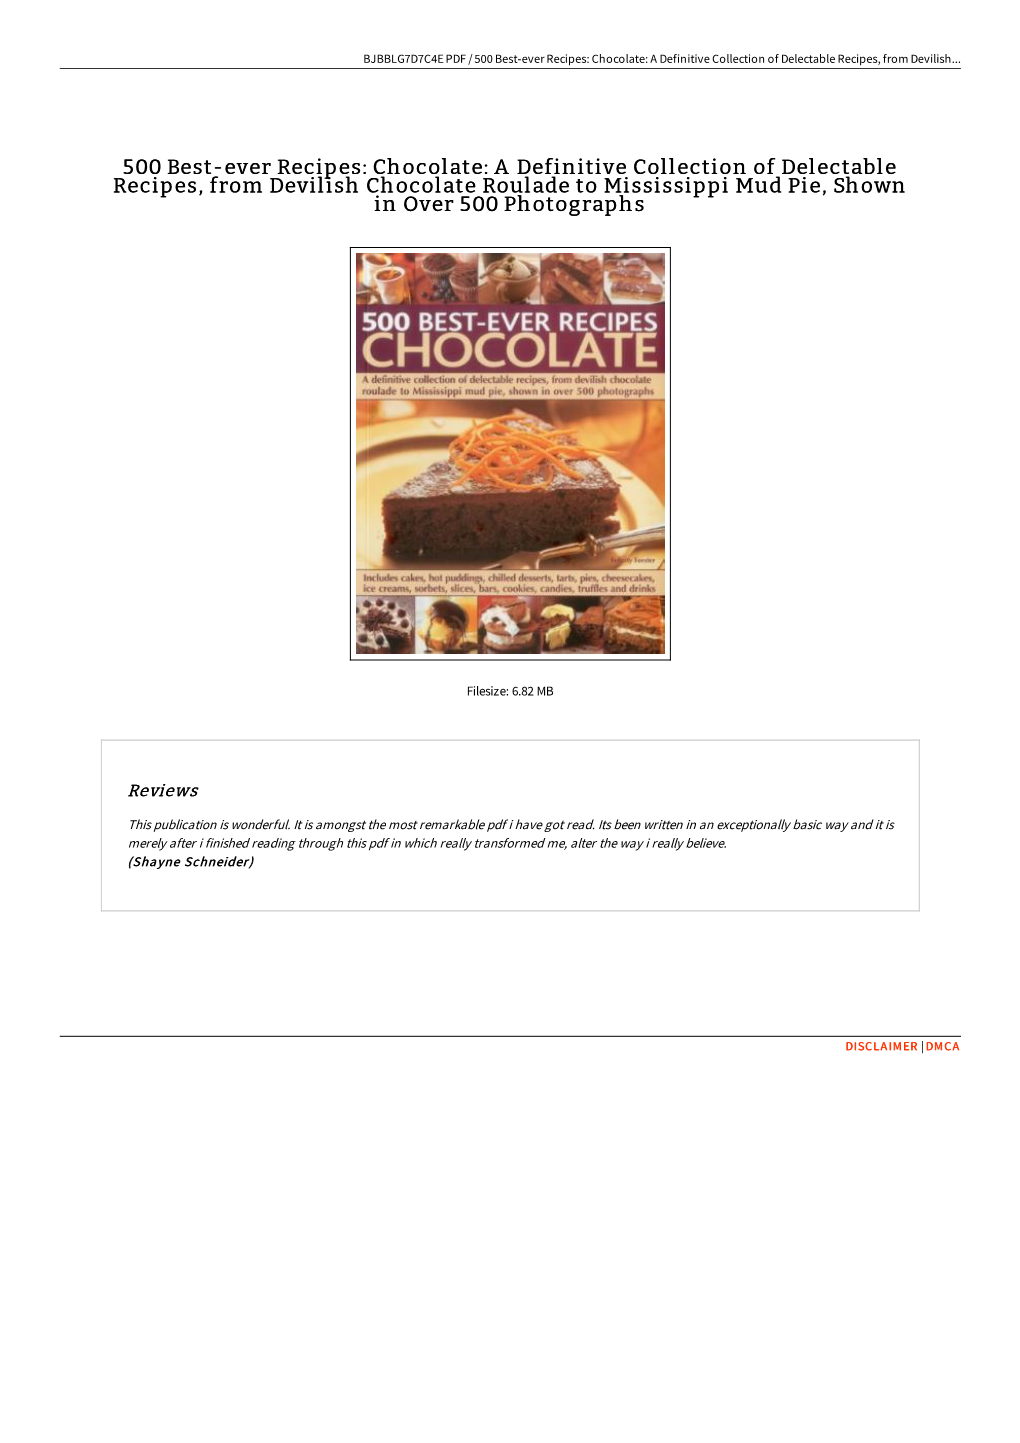 Chocolate: a Definitive Collection of Delectable Recipes, from Devilish